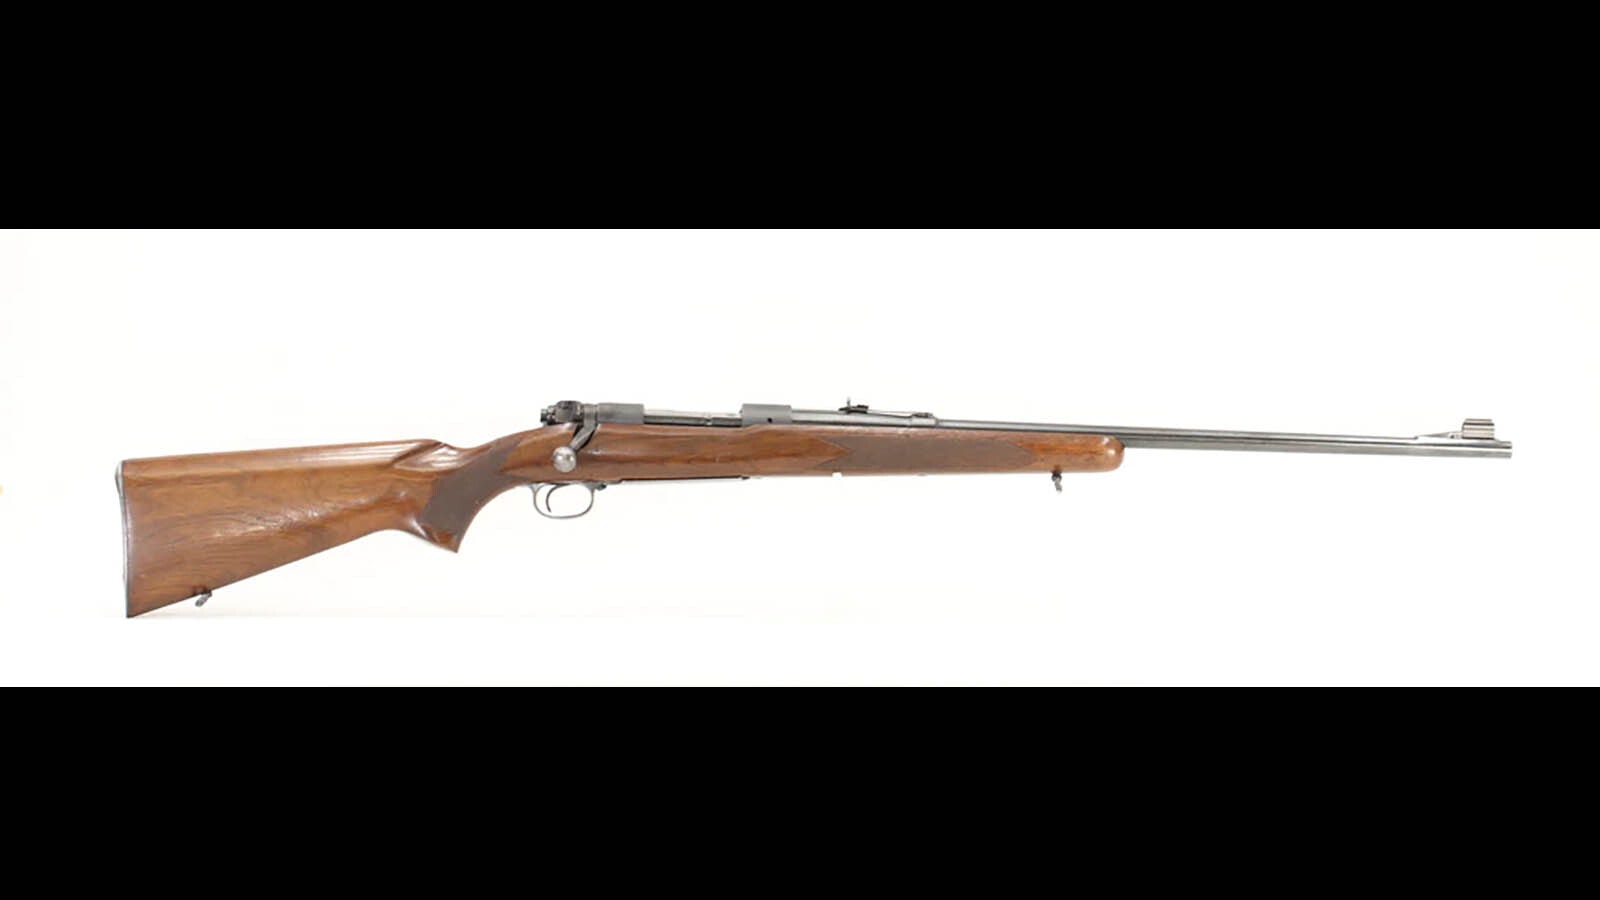 Pre-1964 Winchester Model 70 rifles, such as this 1950 edition chambered in .257 Roberts, might have originally sold for under $150, but now are worth thousands.